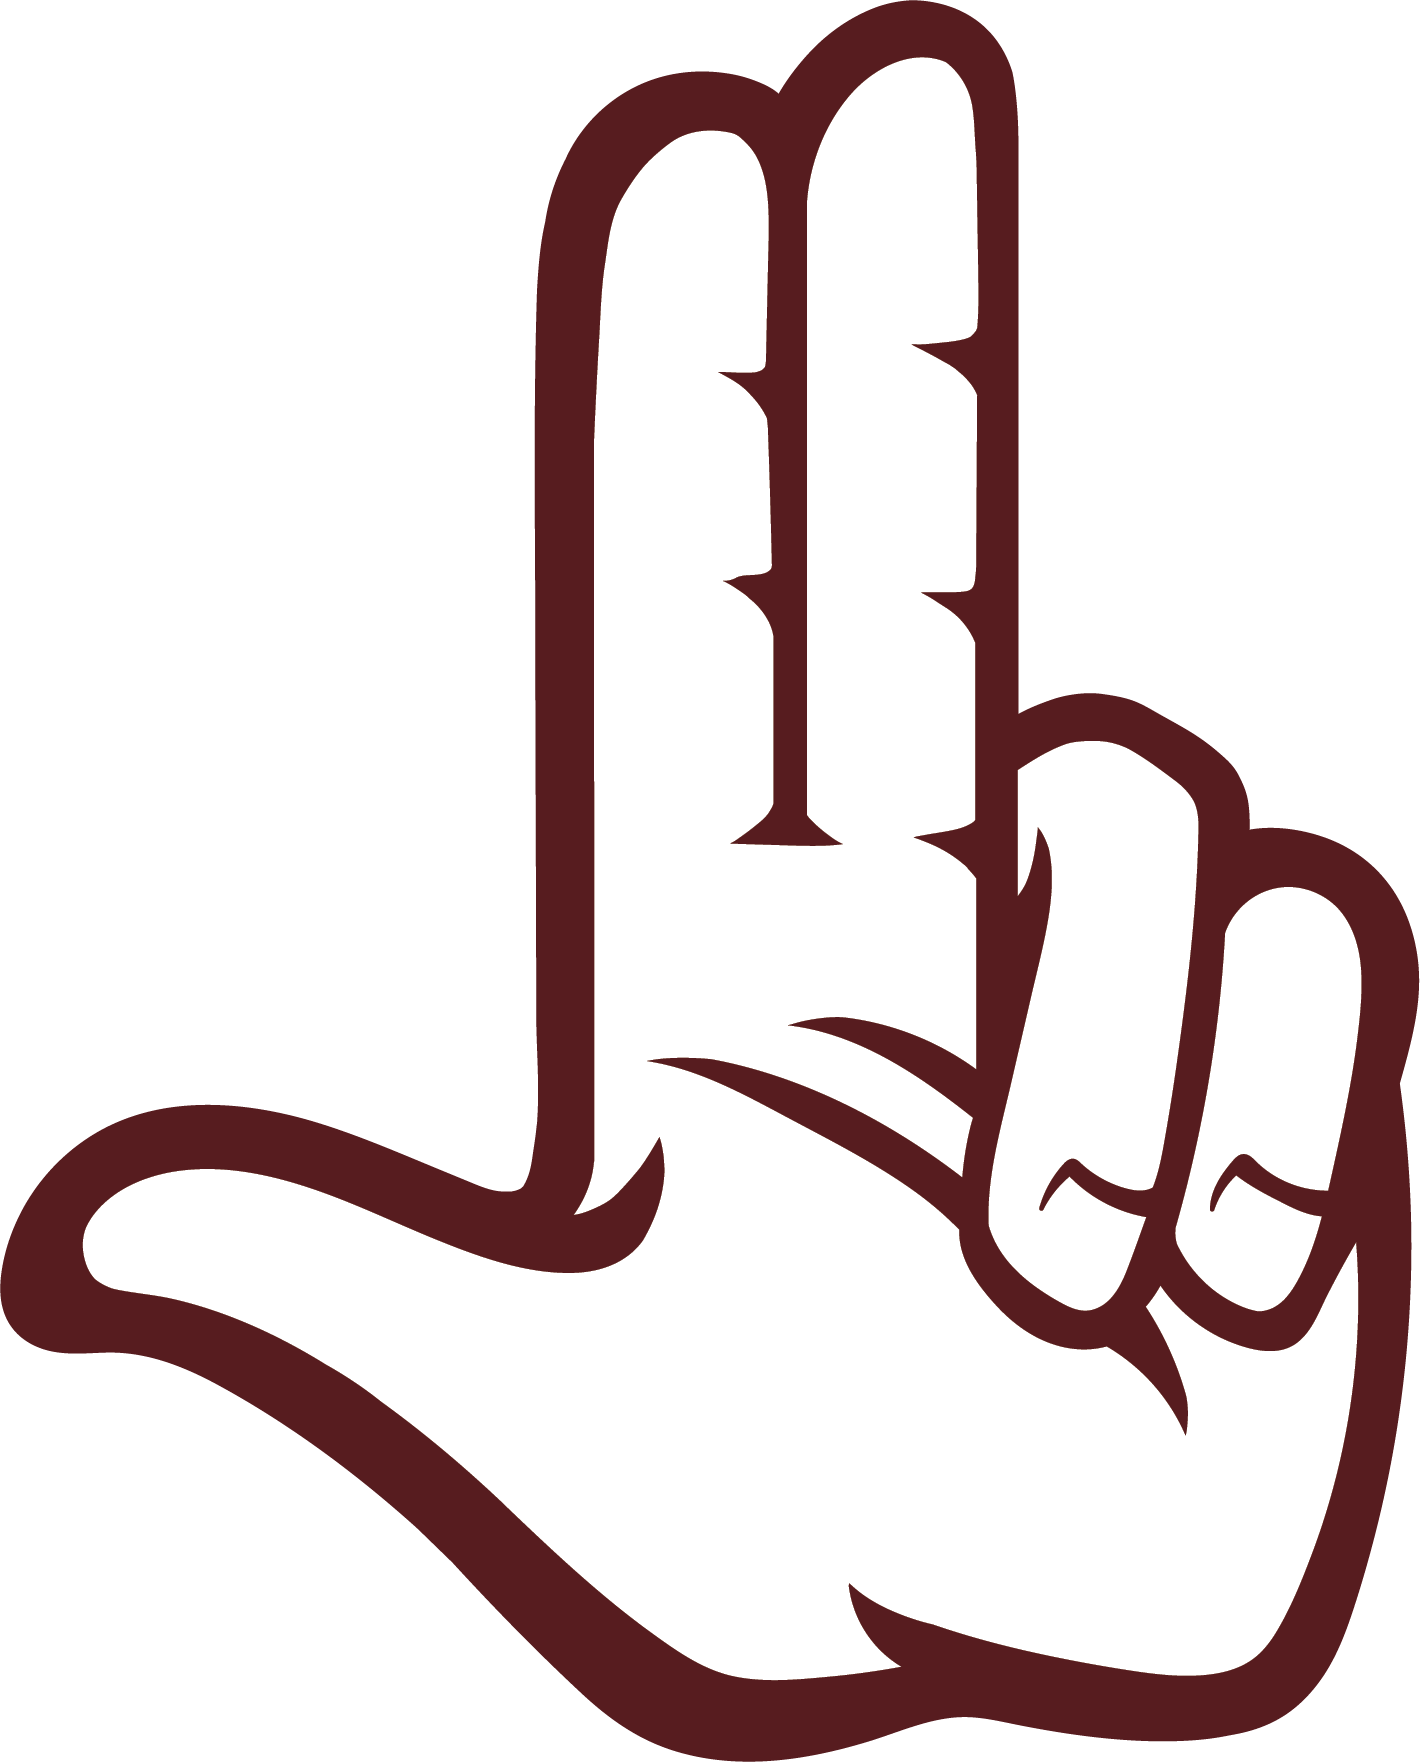 State hand sign in maroon